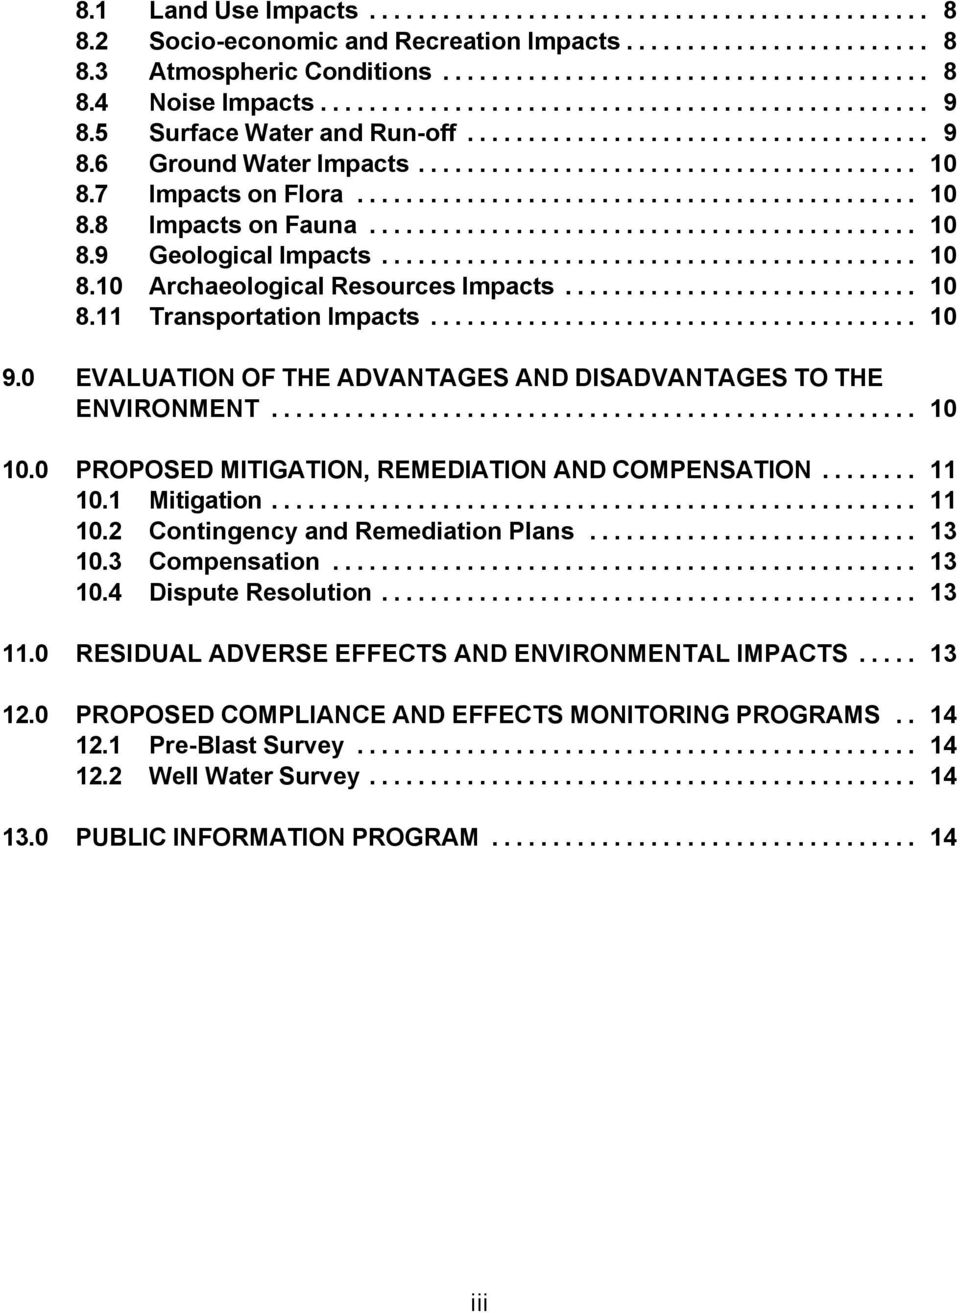 0 EVALUATION OF THE ADVANTAGES AND DISADVANTAGES TO THE ENVIRONMENT... 10 10.0 PROPOSED MITIGATION, REMEDIATION AND COMPENSATION... 11 10.1 Mitigation... 11 10.2 Contingency and Remediation Plans.